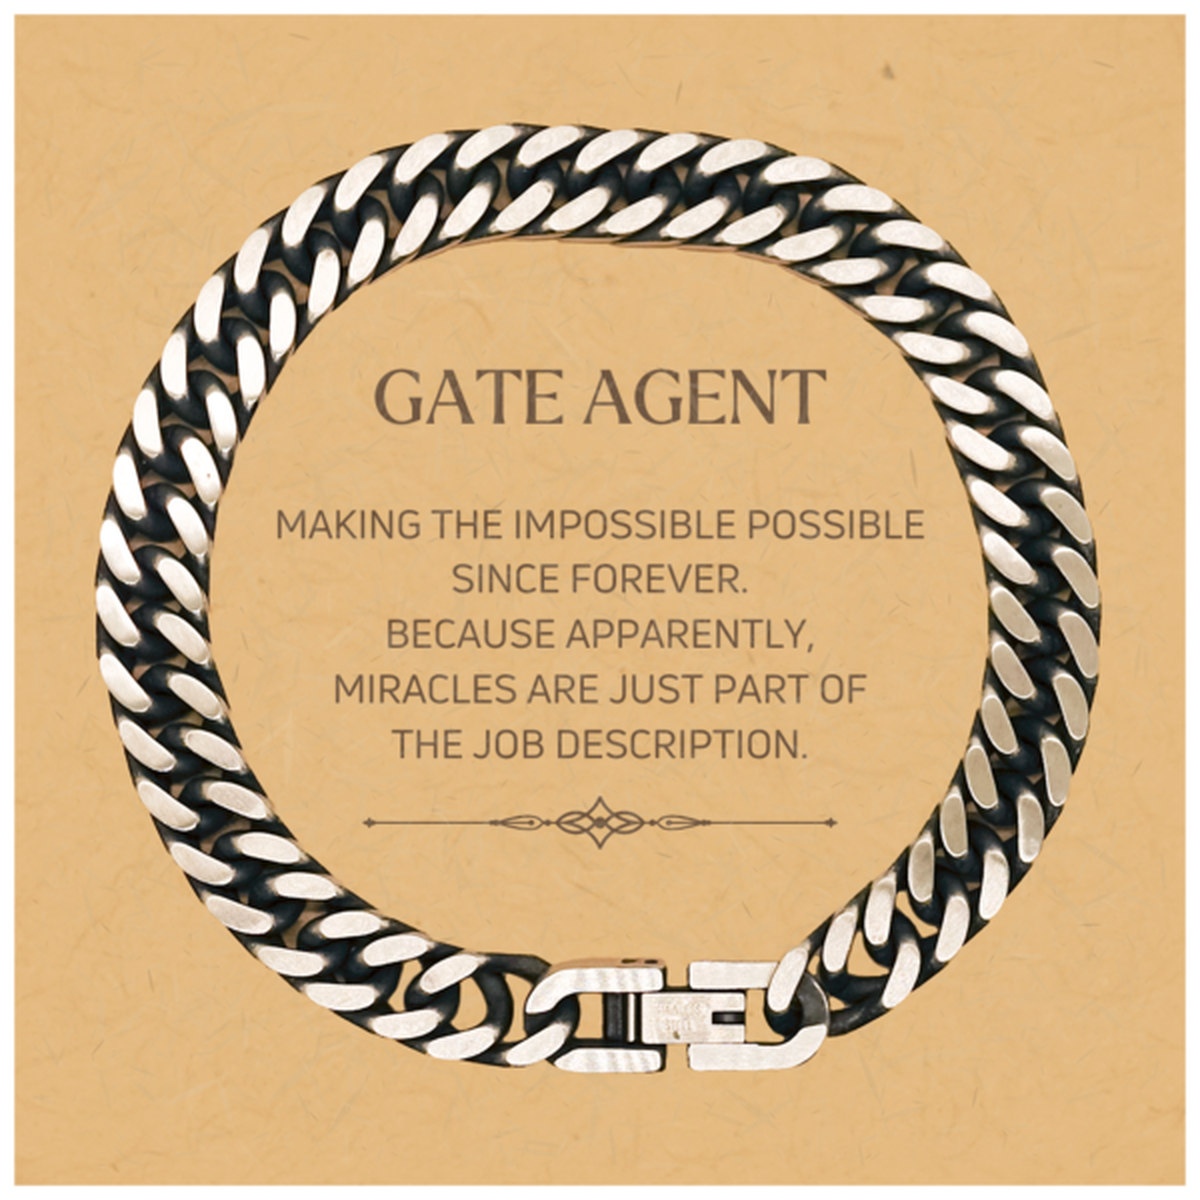 Funny Gate Agent Gifts, Miracles are just part of the job description, Inspirational Birthday Christmas Cuban Link Chain Bracelet For Gate Agent, Men, Women, Coworkers, Friends, Boss